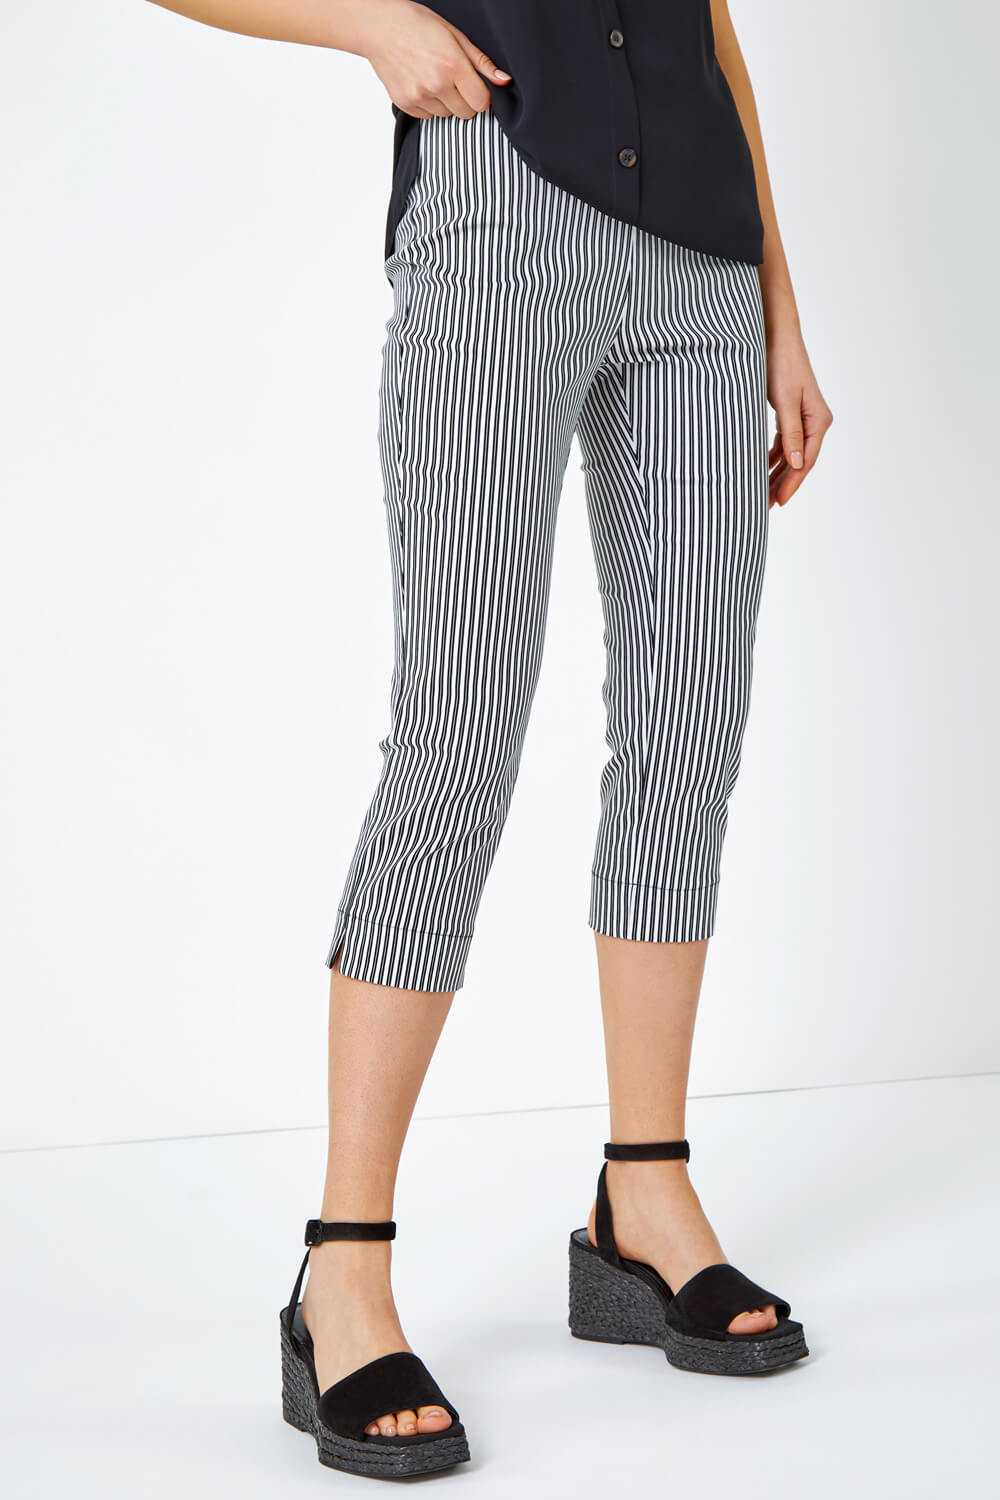 Black Striped Cropped Stretch Trouser, Image 5 of 5